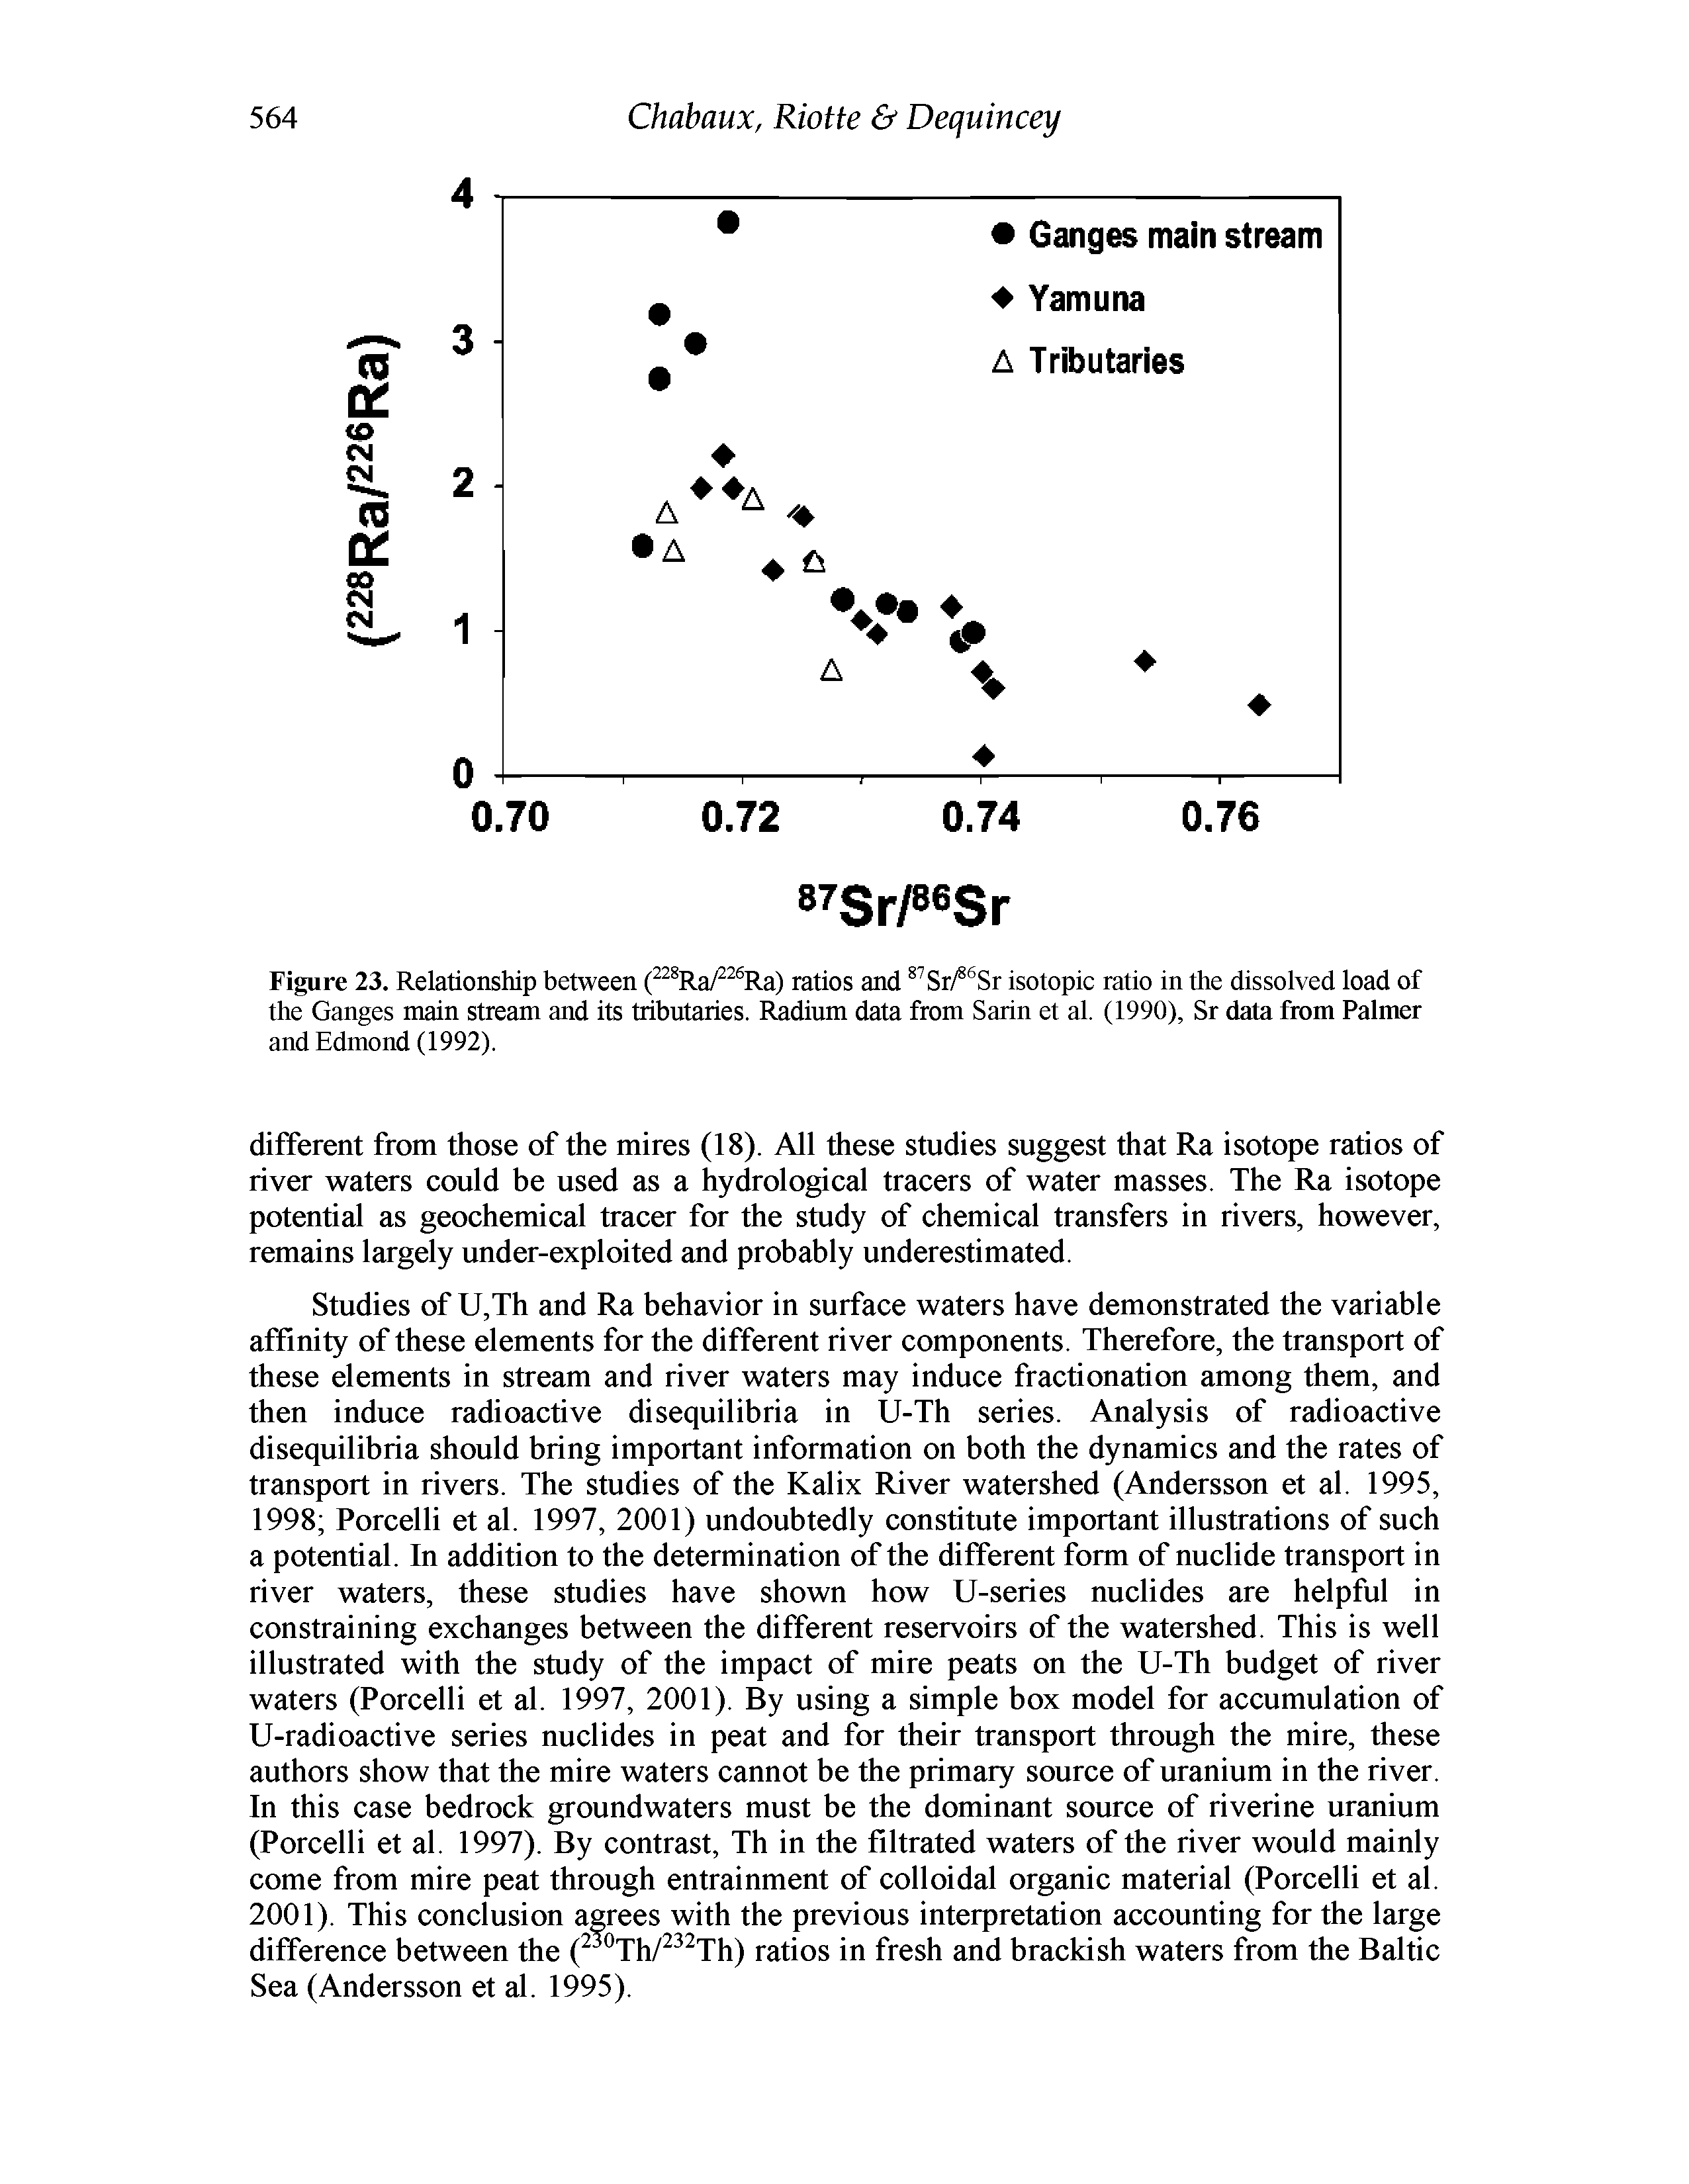 Figure 23. Relationship between ( Ra/ Ra) ratios and Sr/ Sr isotopic ratio in the dissolved load of the Ganges main stream and its tributaries. Radium data from Sarin et al. (1990), Sr data from Palmer and Edmond (1992).